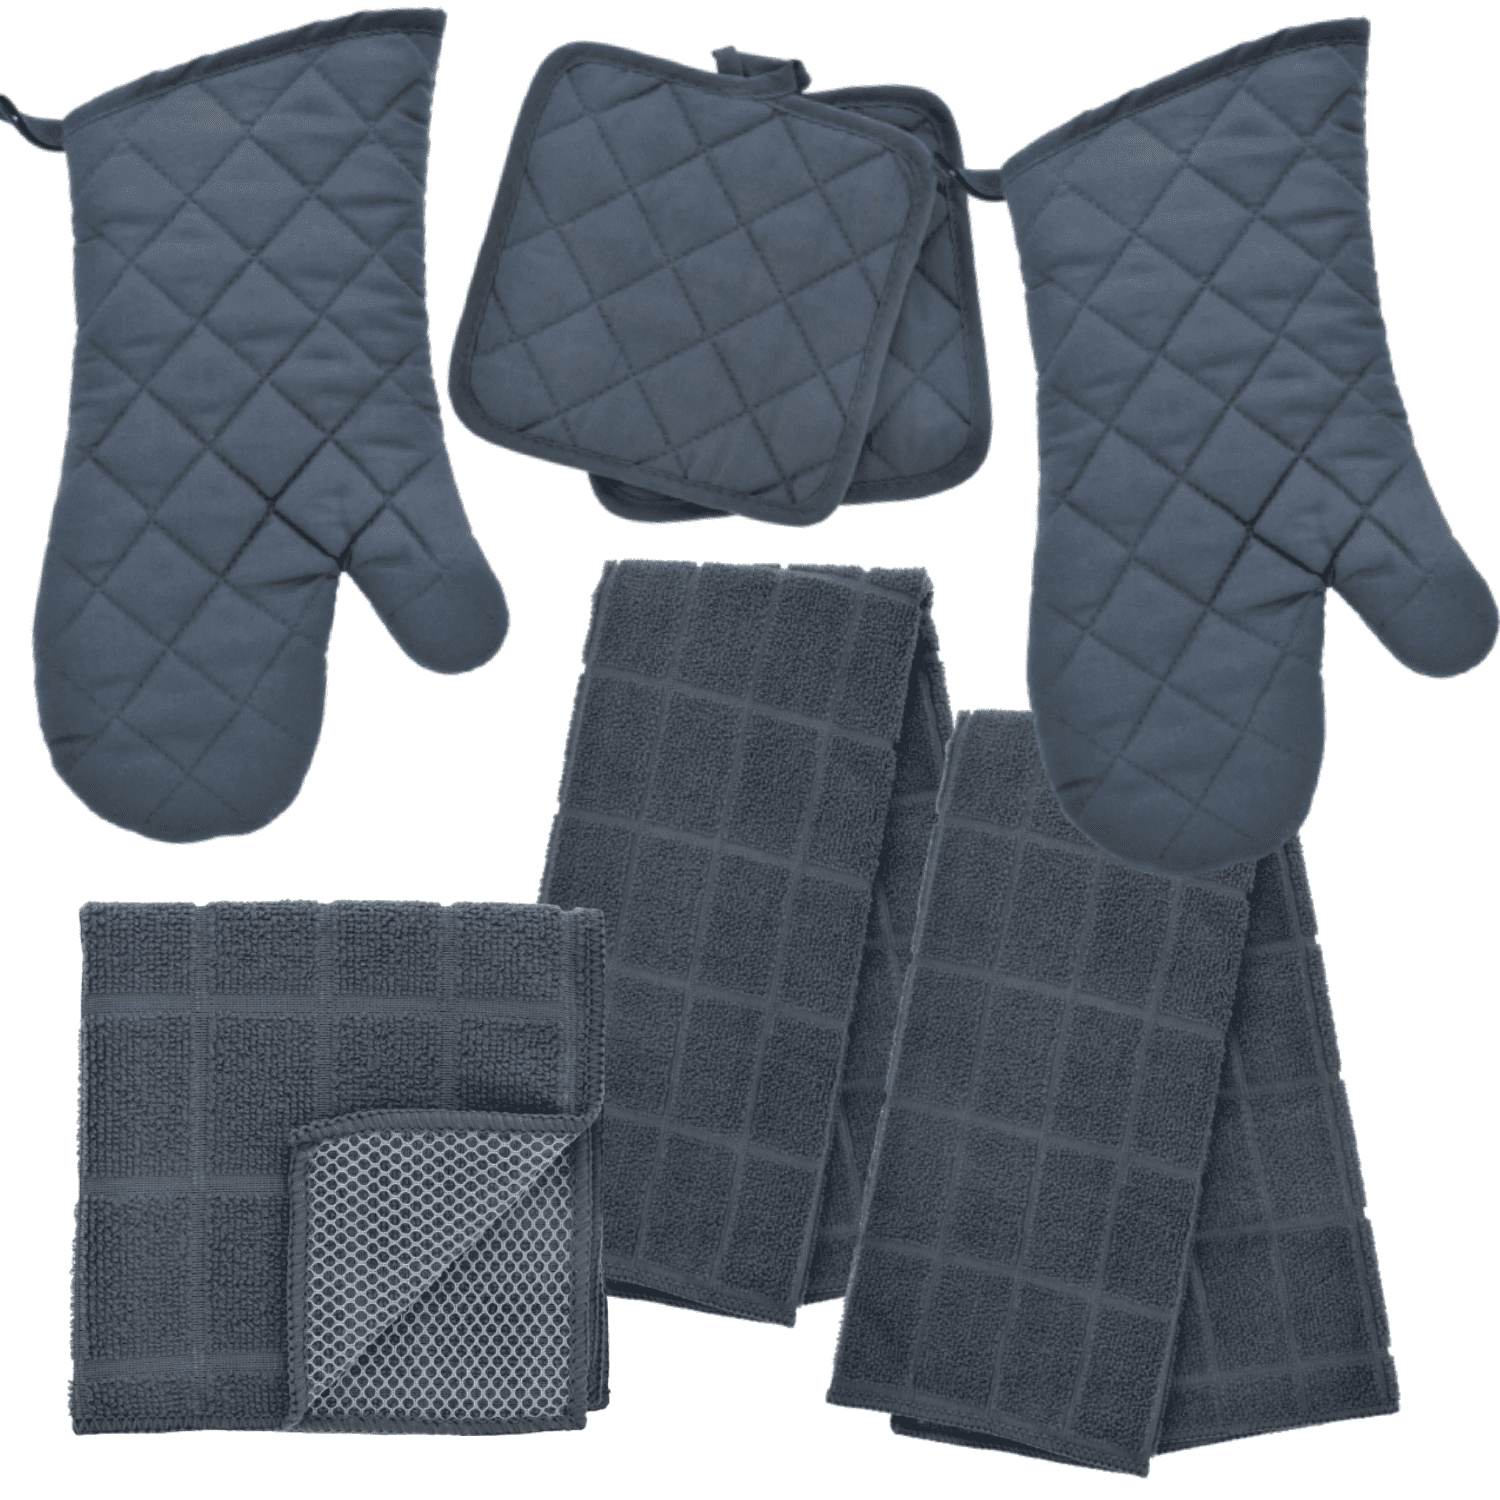 Dish Drying Kitchen Towel Set with 2 Quilted Pot Holders Dish Towel Oven Mitt 